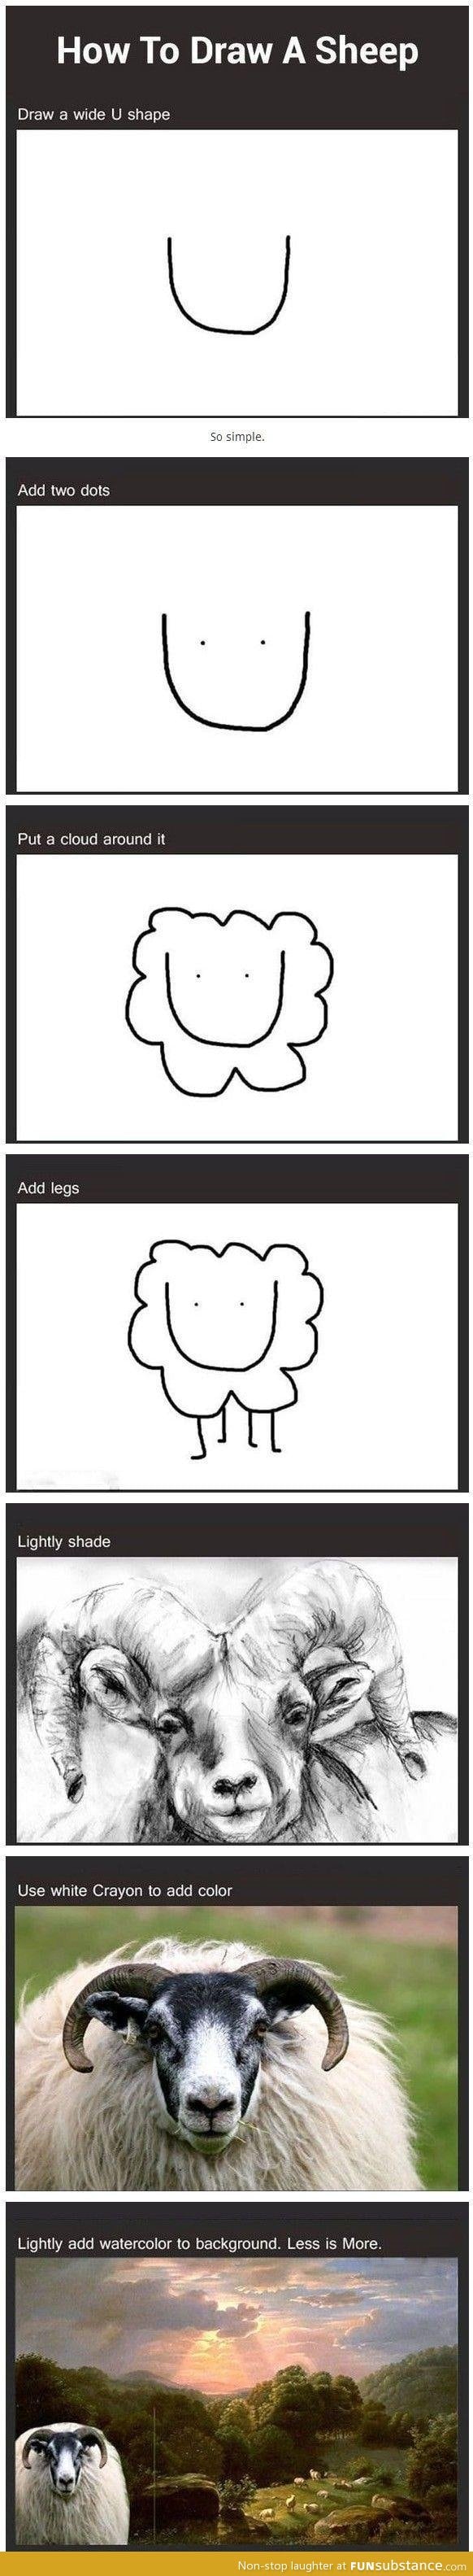 How to draw a sheep - FunSubstance